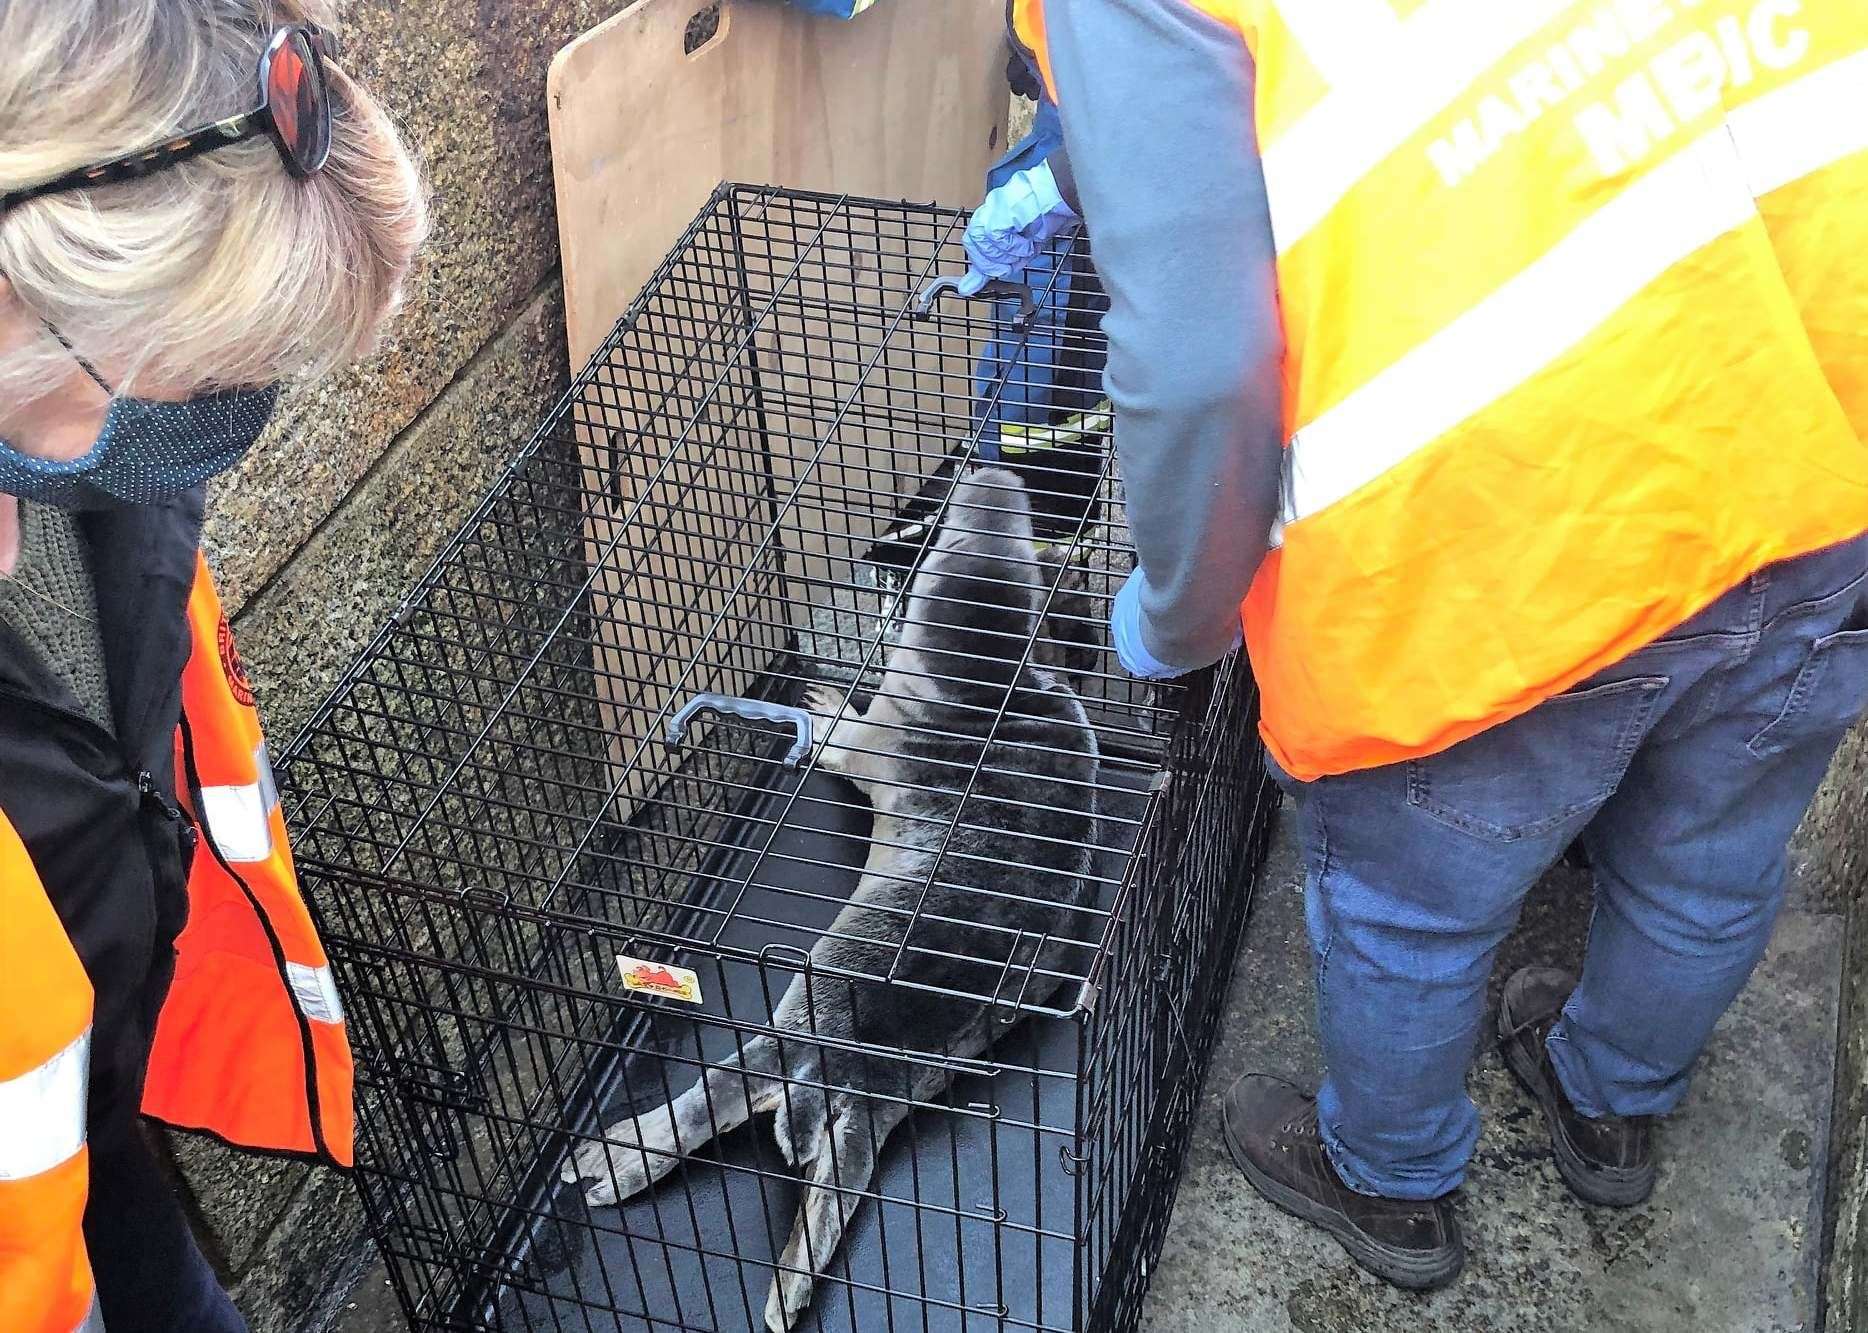 She was captured and taken to a quieter spot. Picture: Folkestone Coastguard